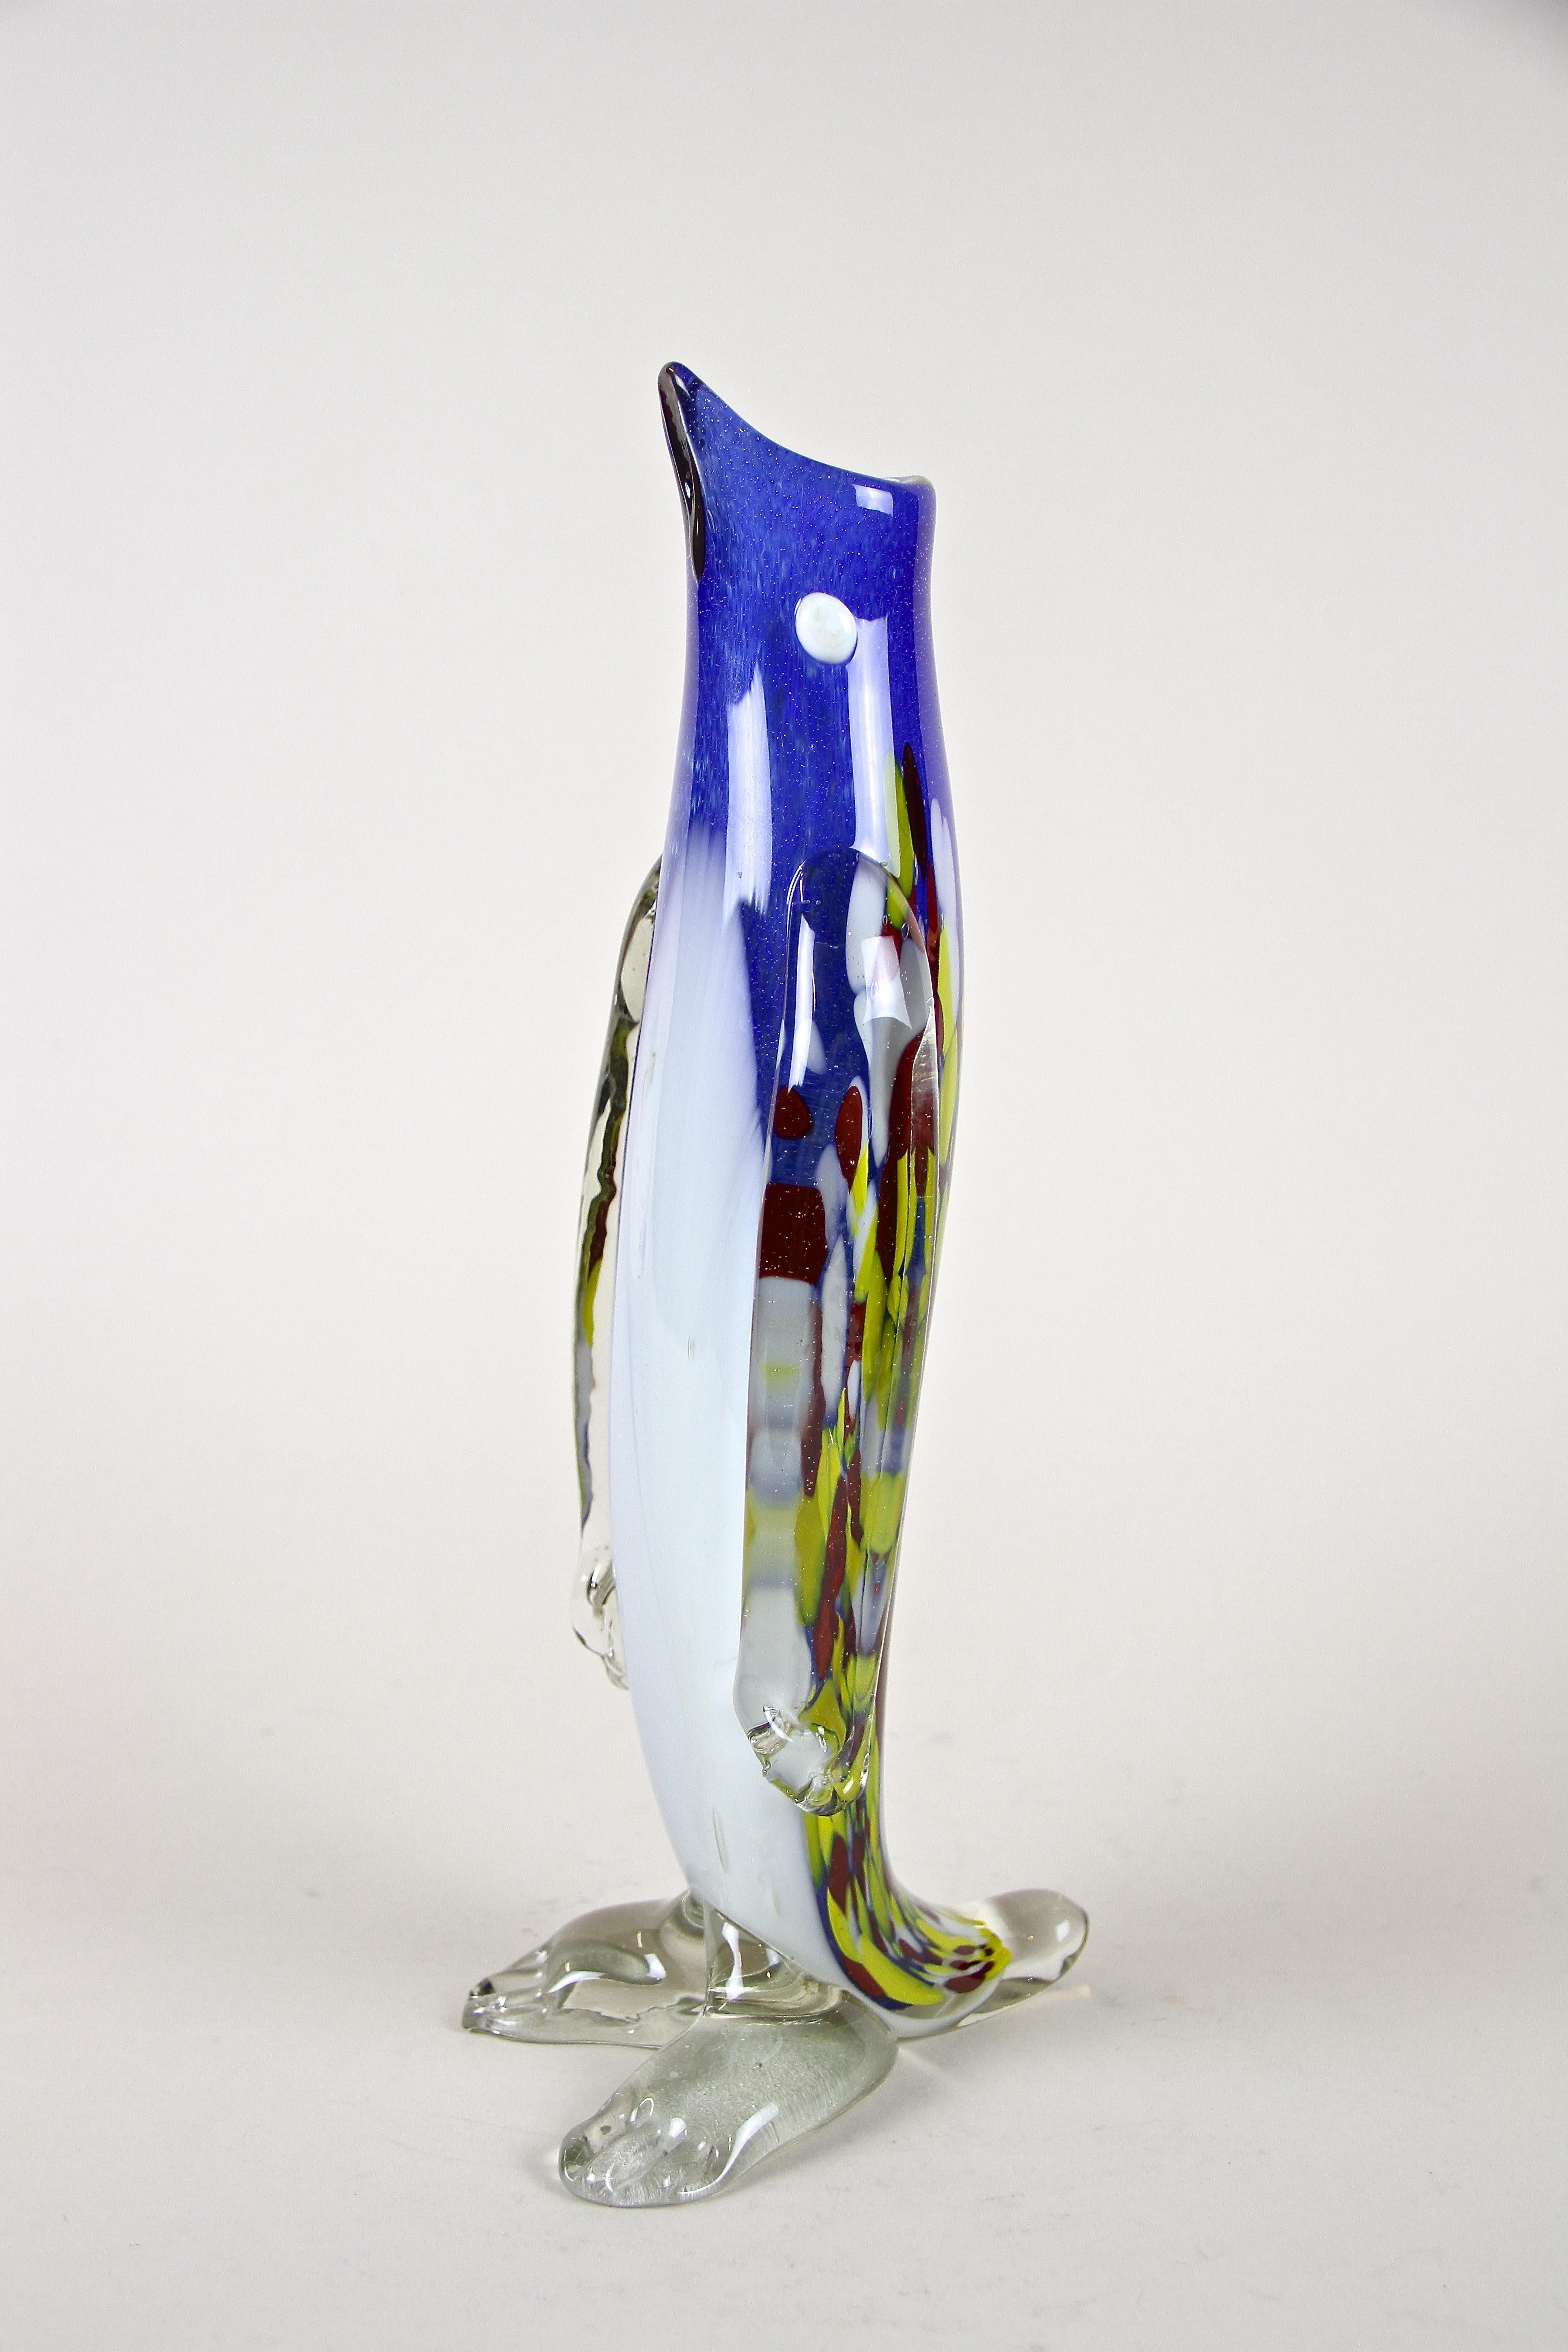 Extraordinary 20th century Murano Glass Penguin Vase out of the famous workshops in Italy from the 1960s. An exceptional designed vase in the shape of a penguin. The fantastic color setting shows the incredible skills of the world renown